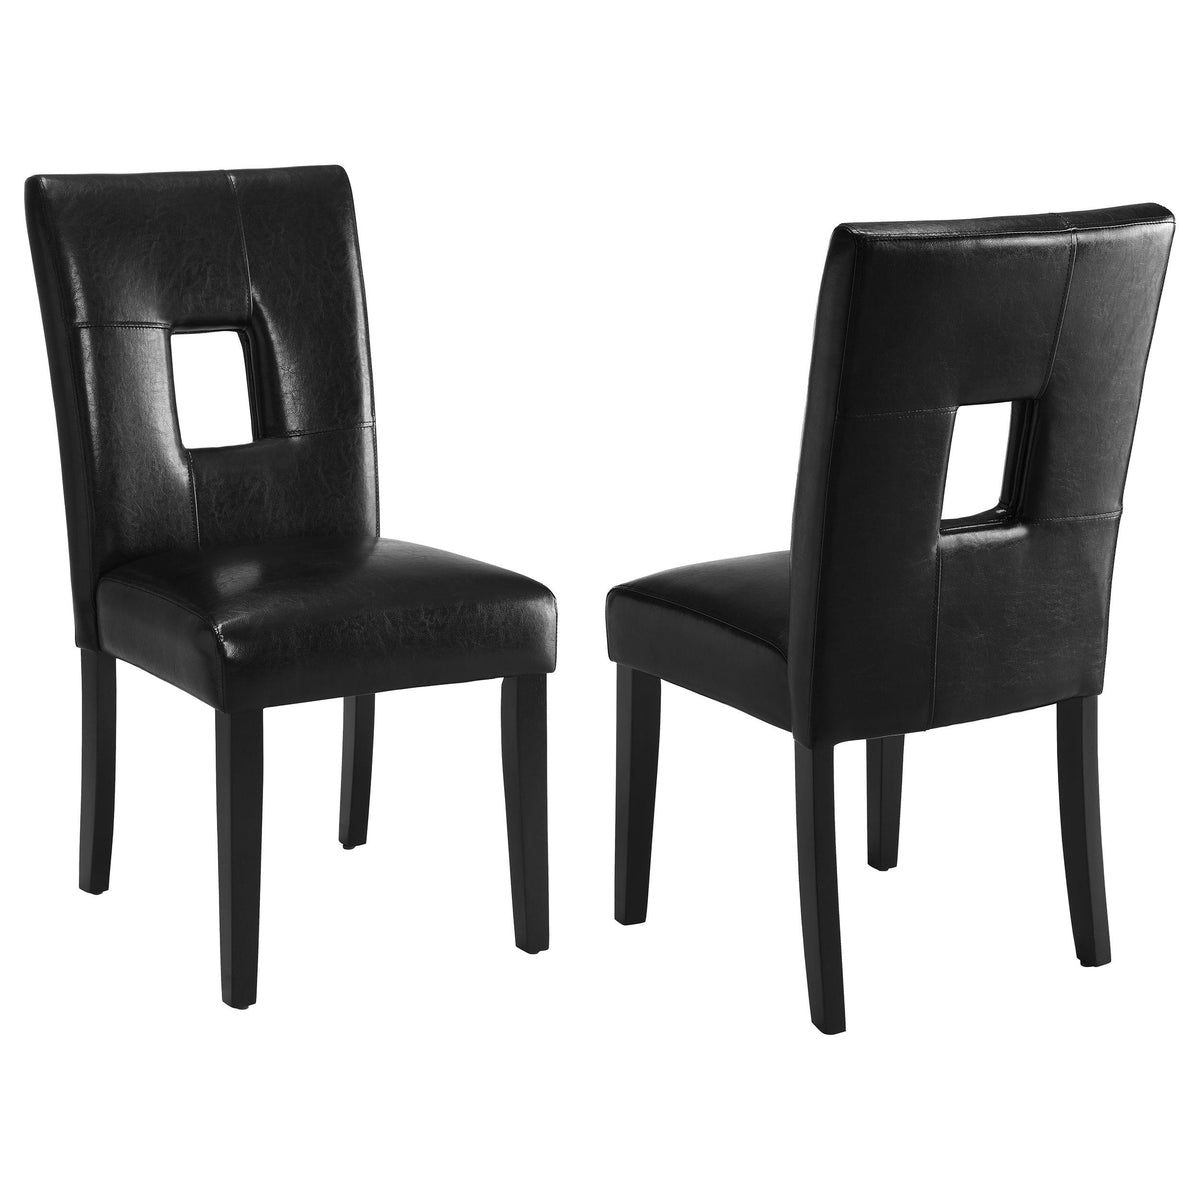 Shannon Open Back Upholstered Dining Chairs Black (Set of 2) Shannon Open Back Upholstered Dining Chairs Black (Set of 2) Half Price Furniture